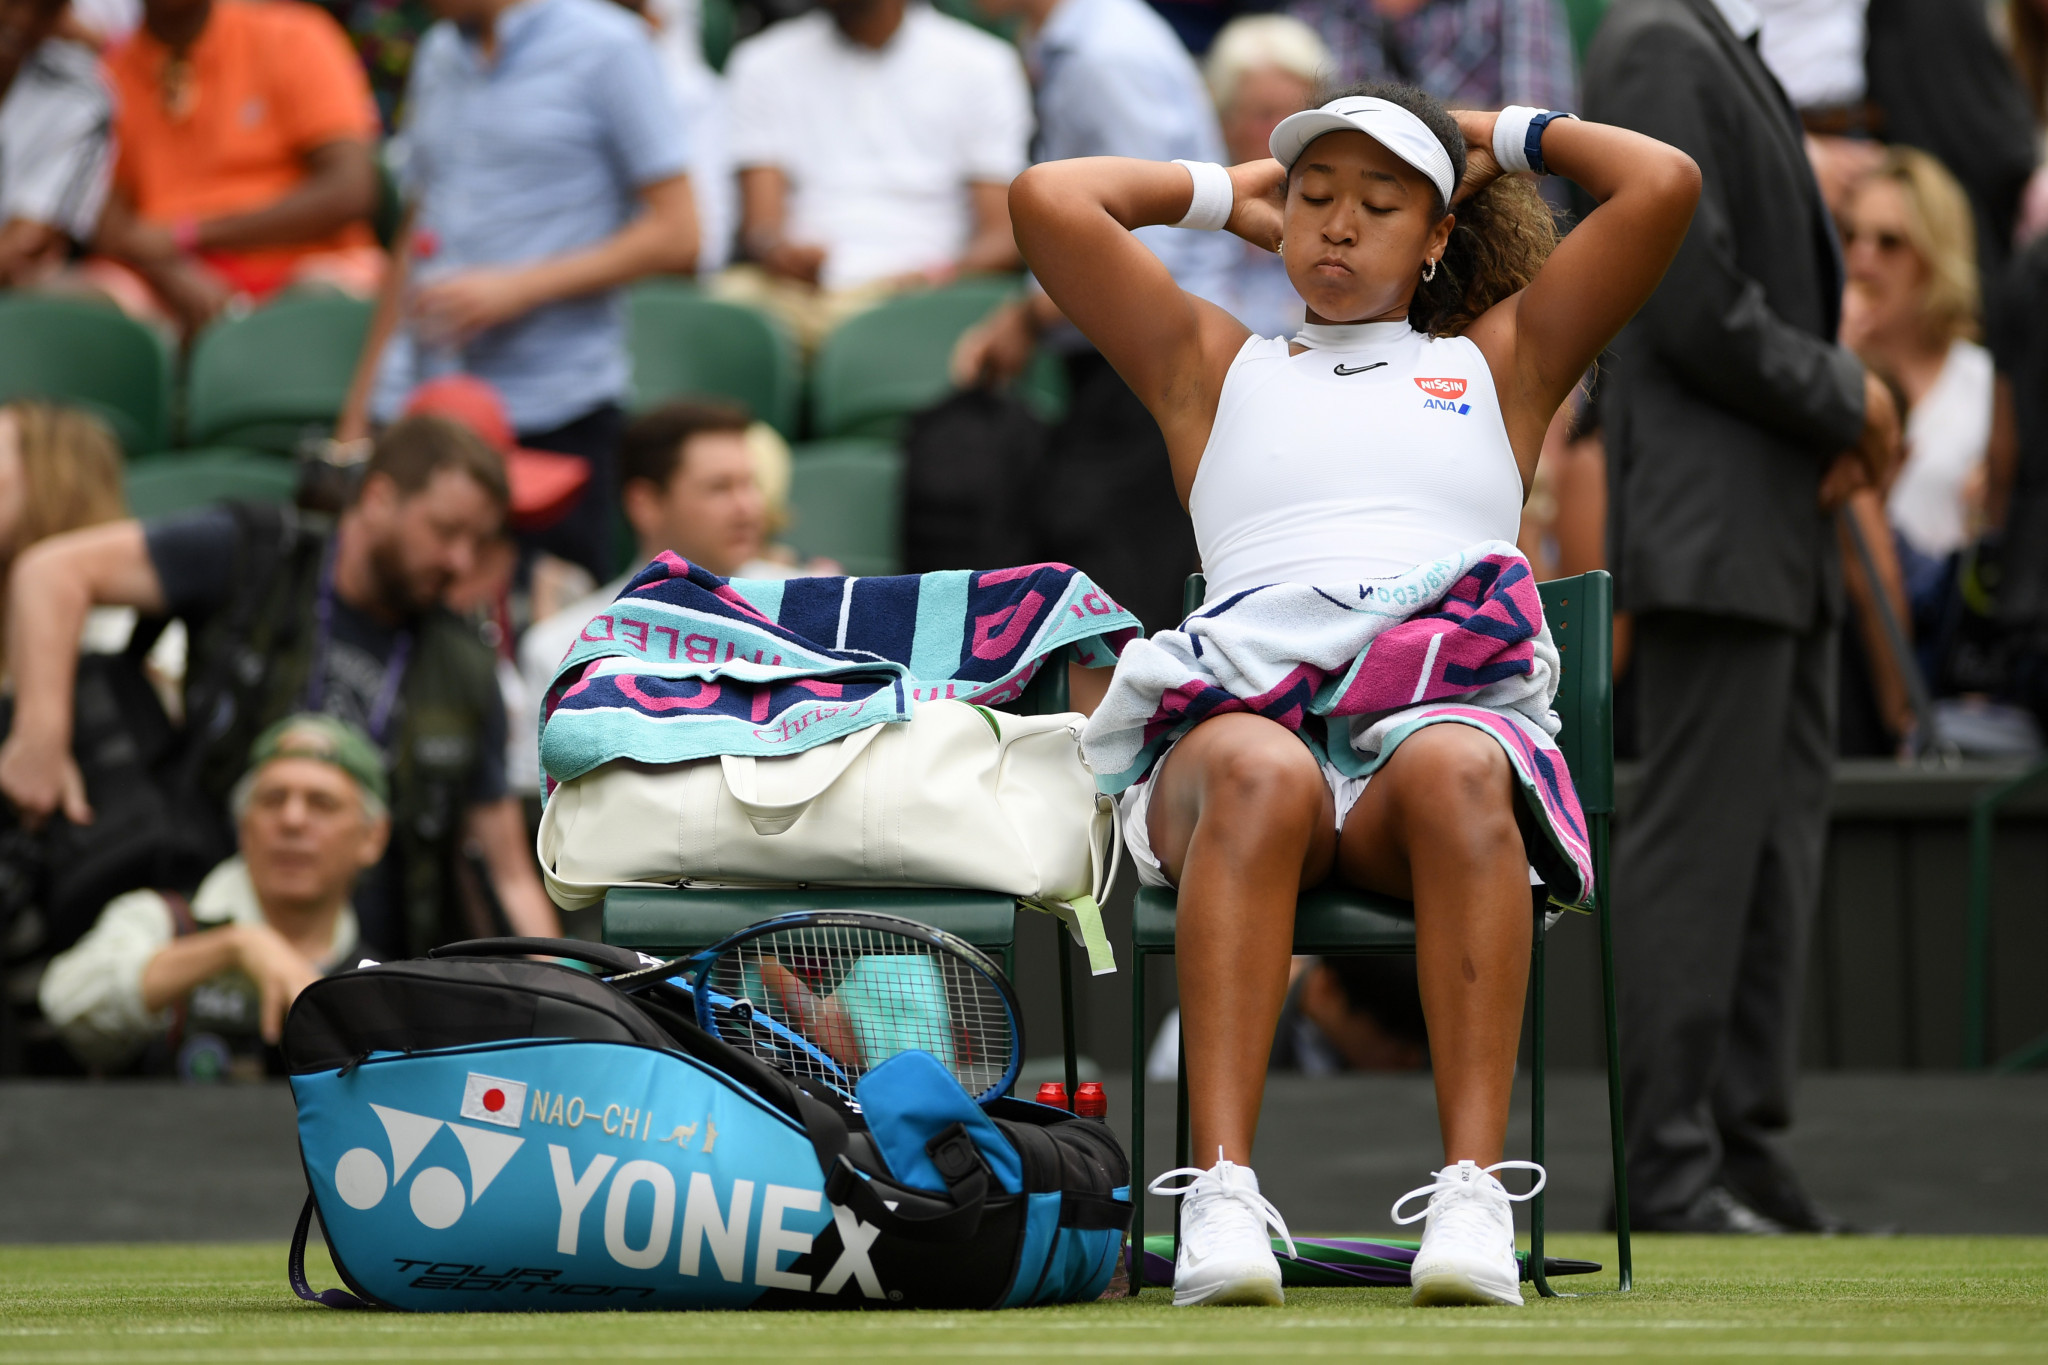 Osaka knocked out of Wimbledon in first round